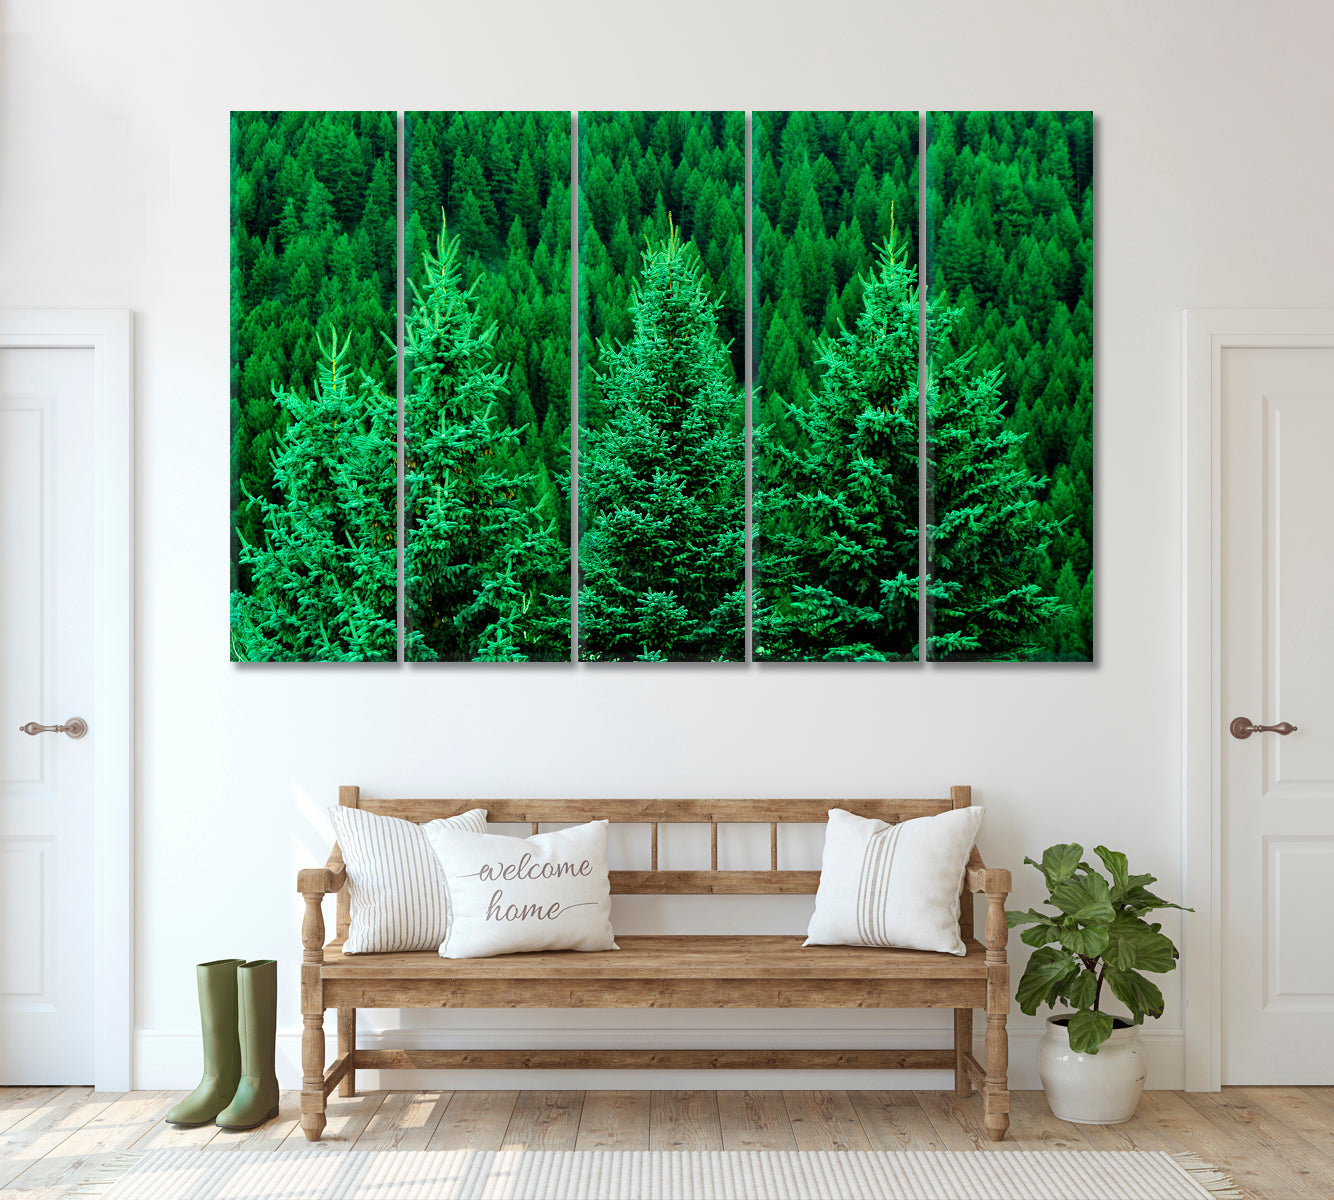 Pine Forest Canvas Print ArtLexy 5 Panels 36"x24" inches 